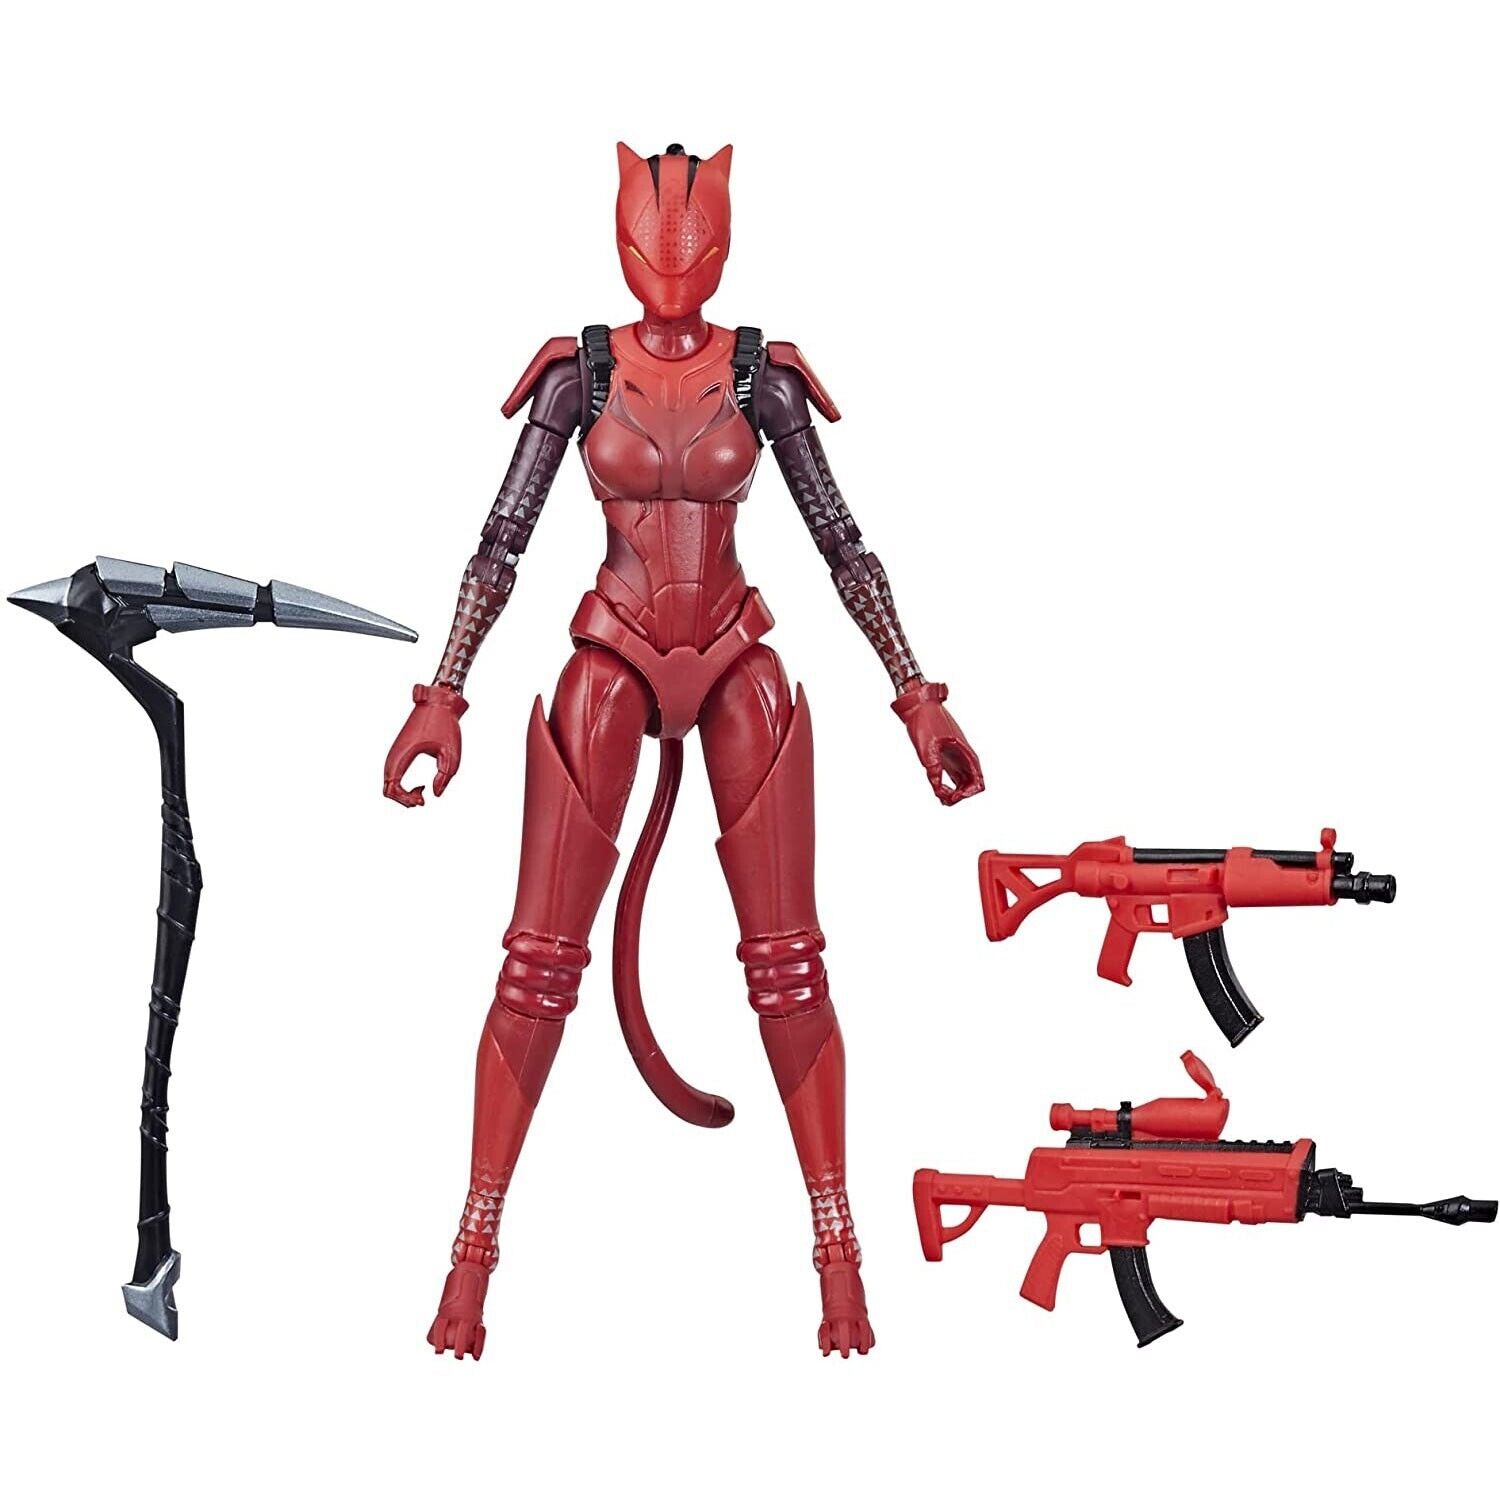 "Fortnite Victory Royale Lynx Red 6" Action Figure - BRAND NEW"